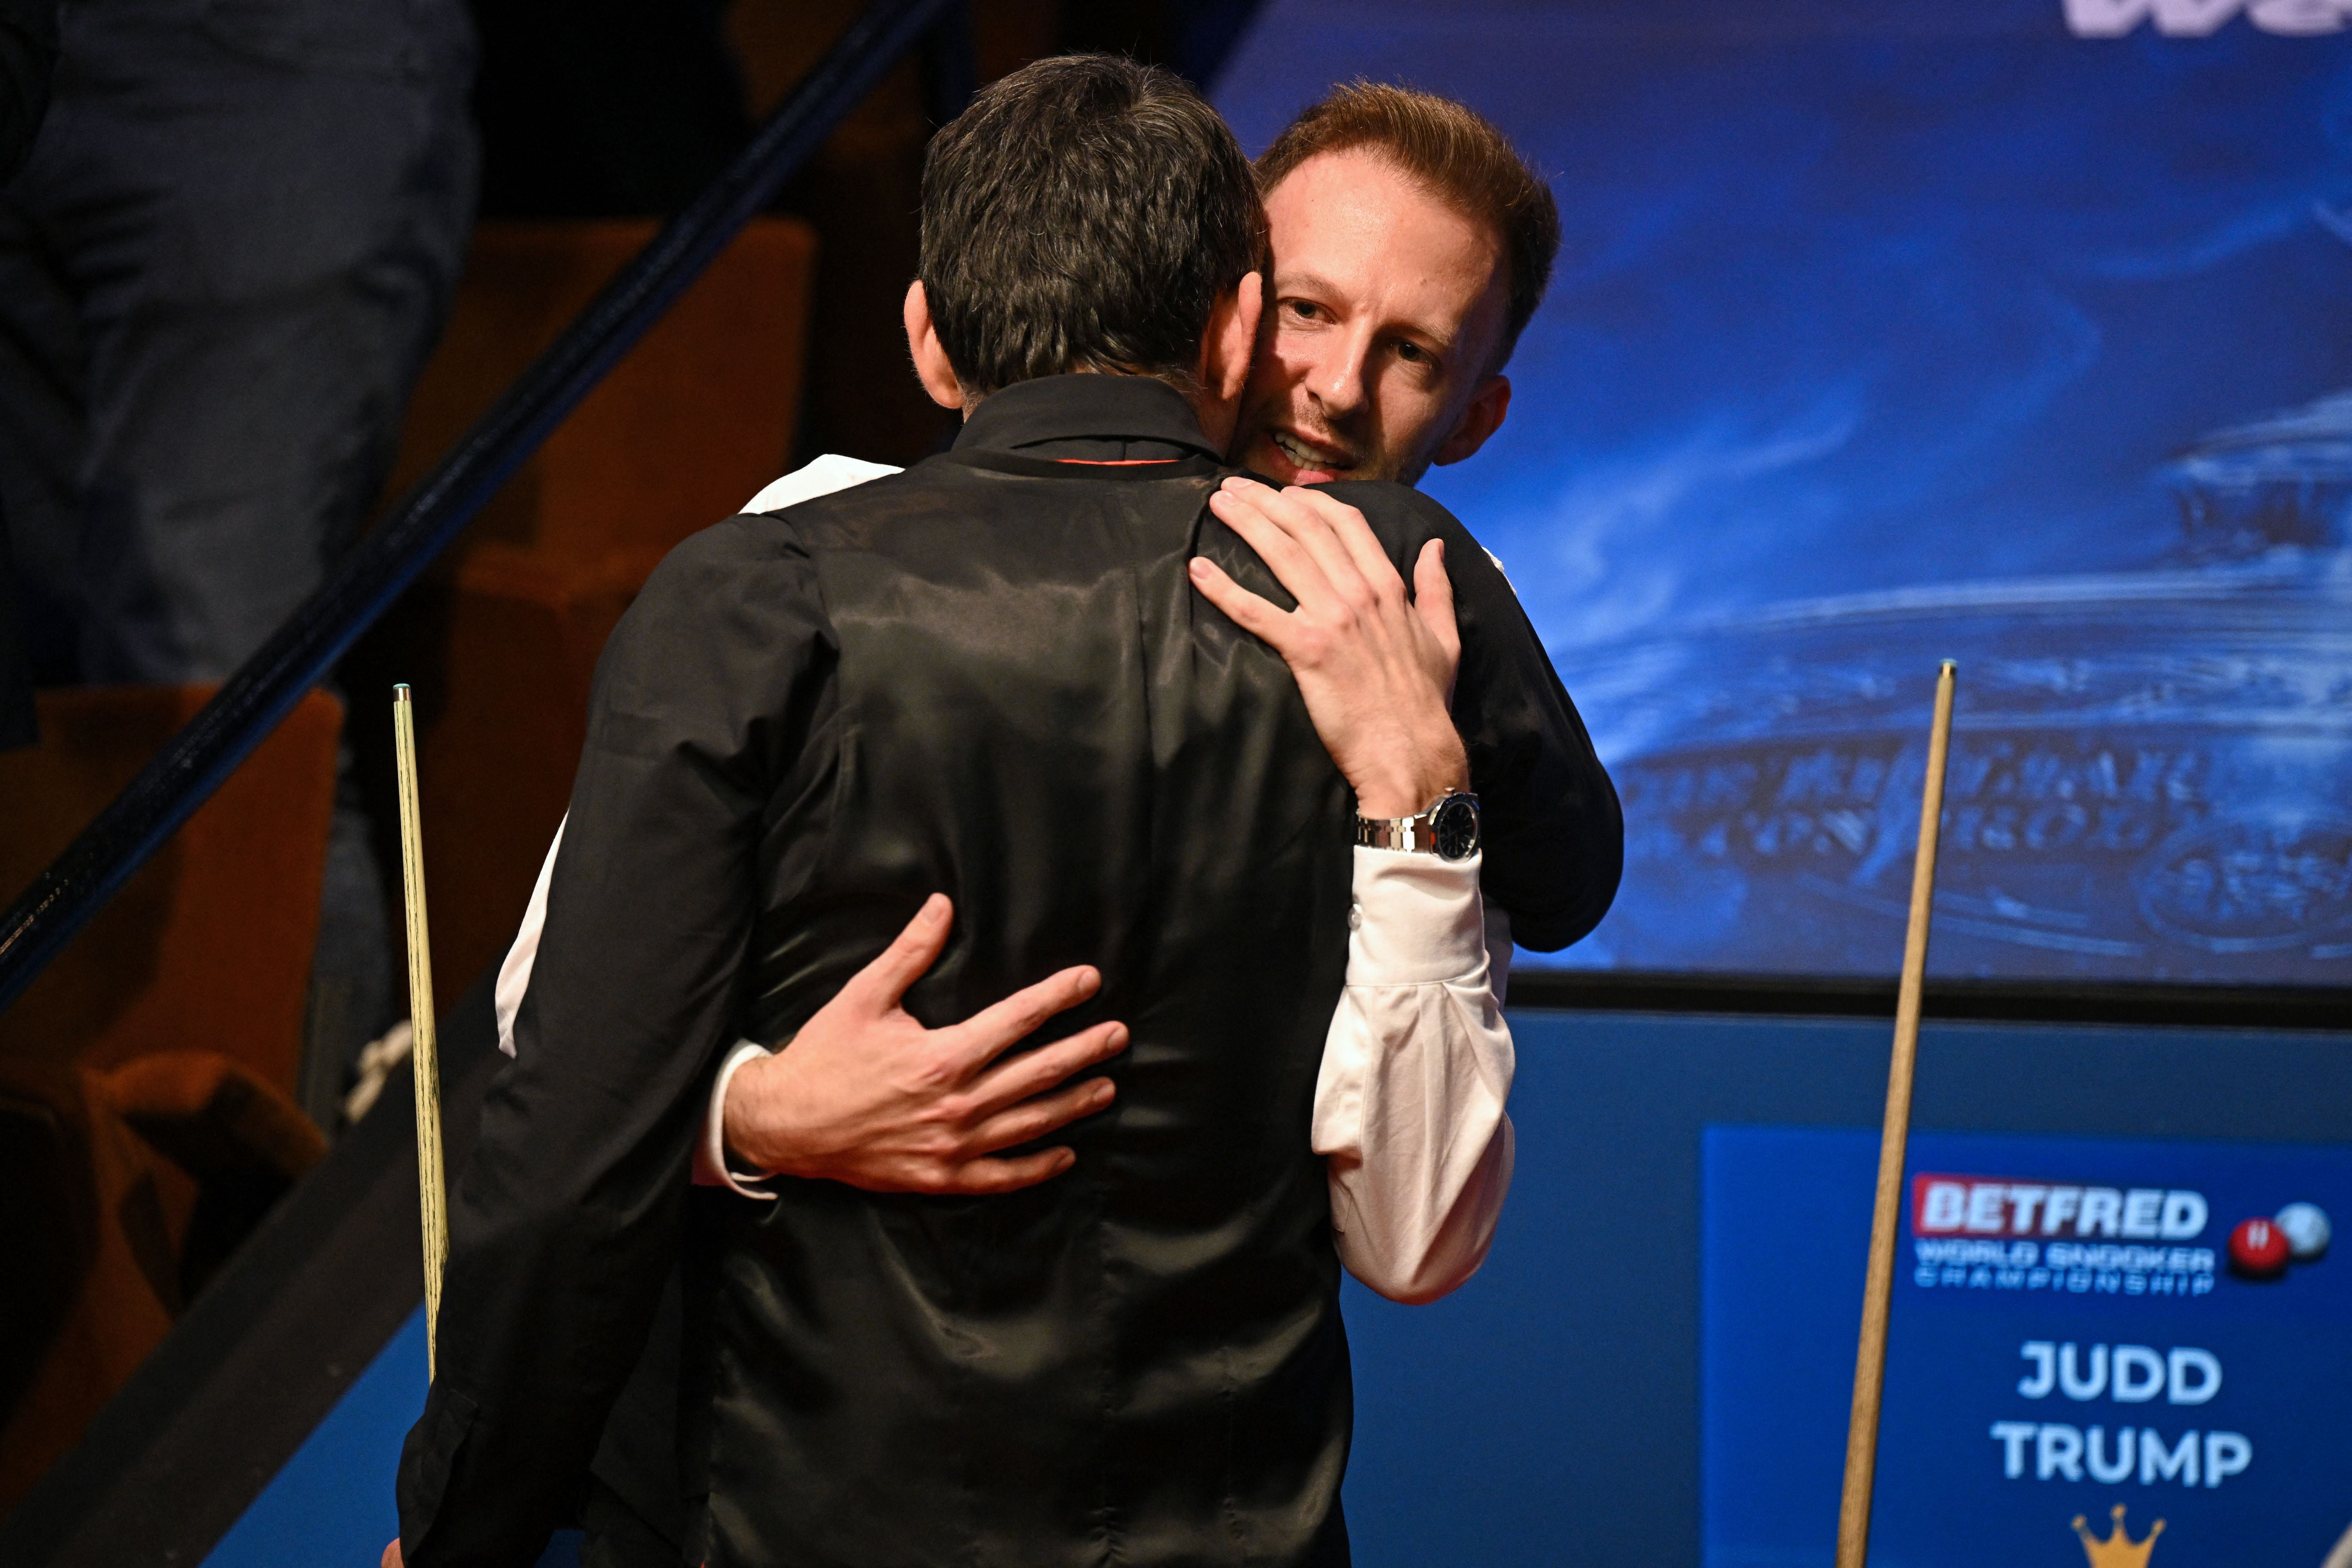 Judd Trump (right) and Ronnie O’Sullivan shared a long embrace after the World Championship final